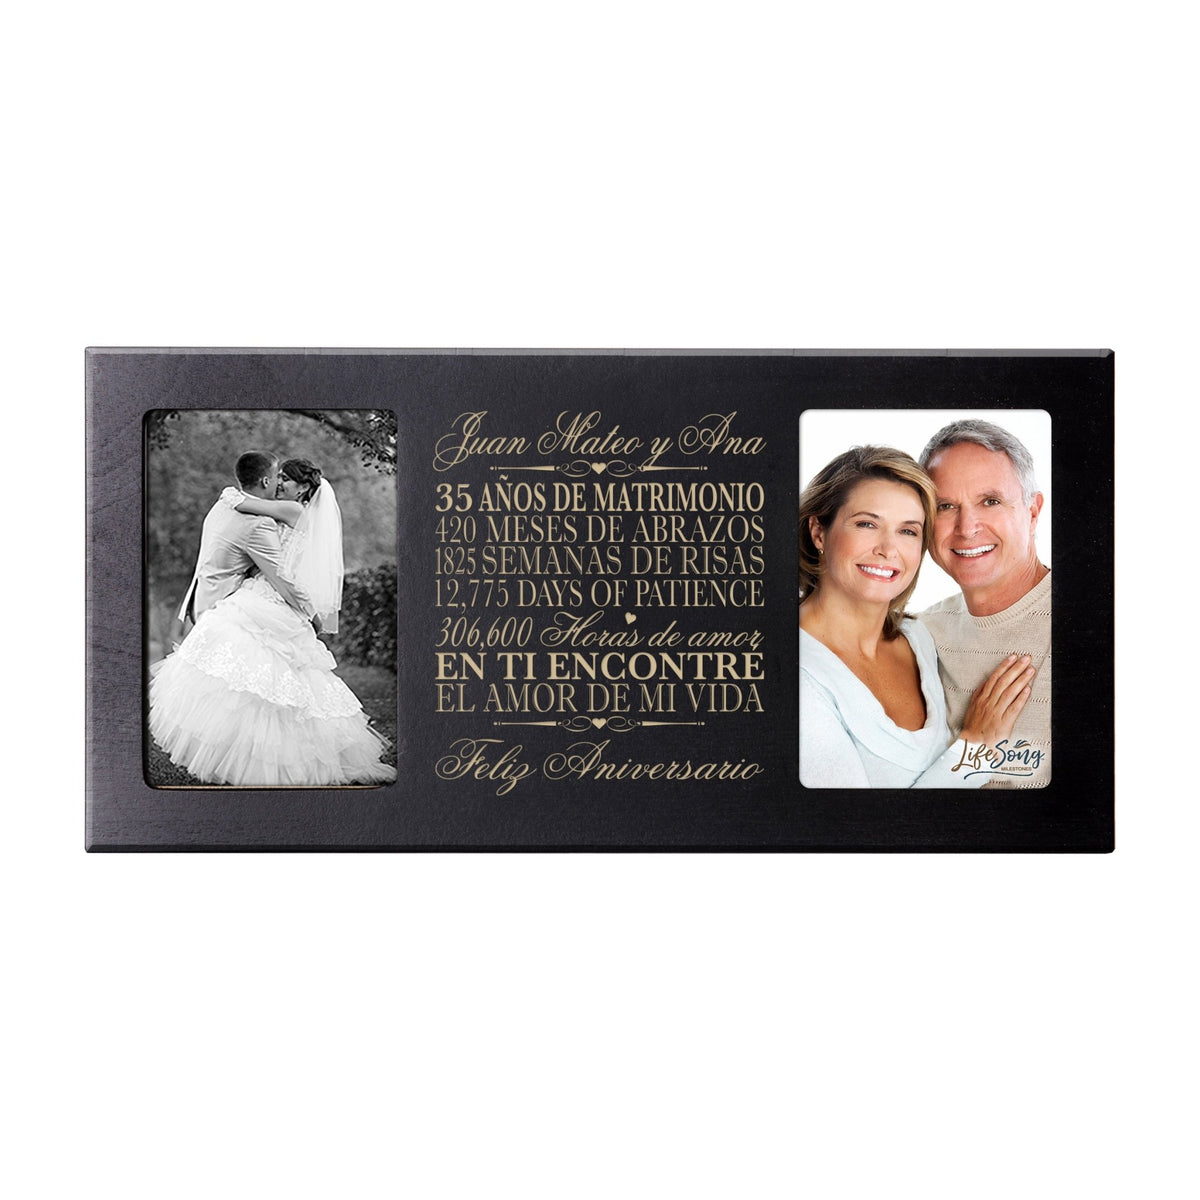 Personalized 35th Anniversary Picture Frame Holds 2-4x6 Photos (Spanish Verse) - LifeSong Milestones